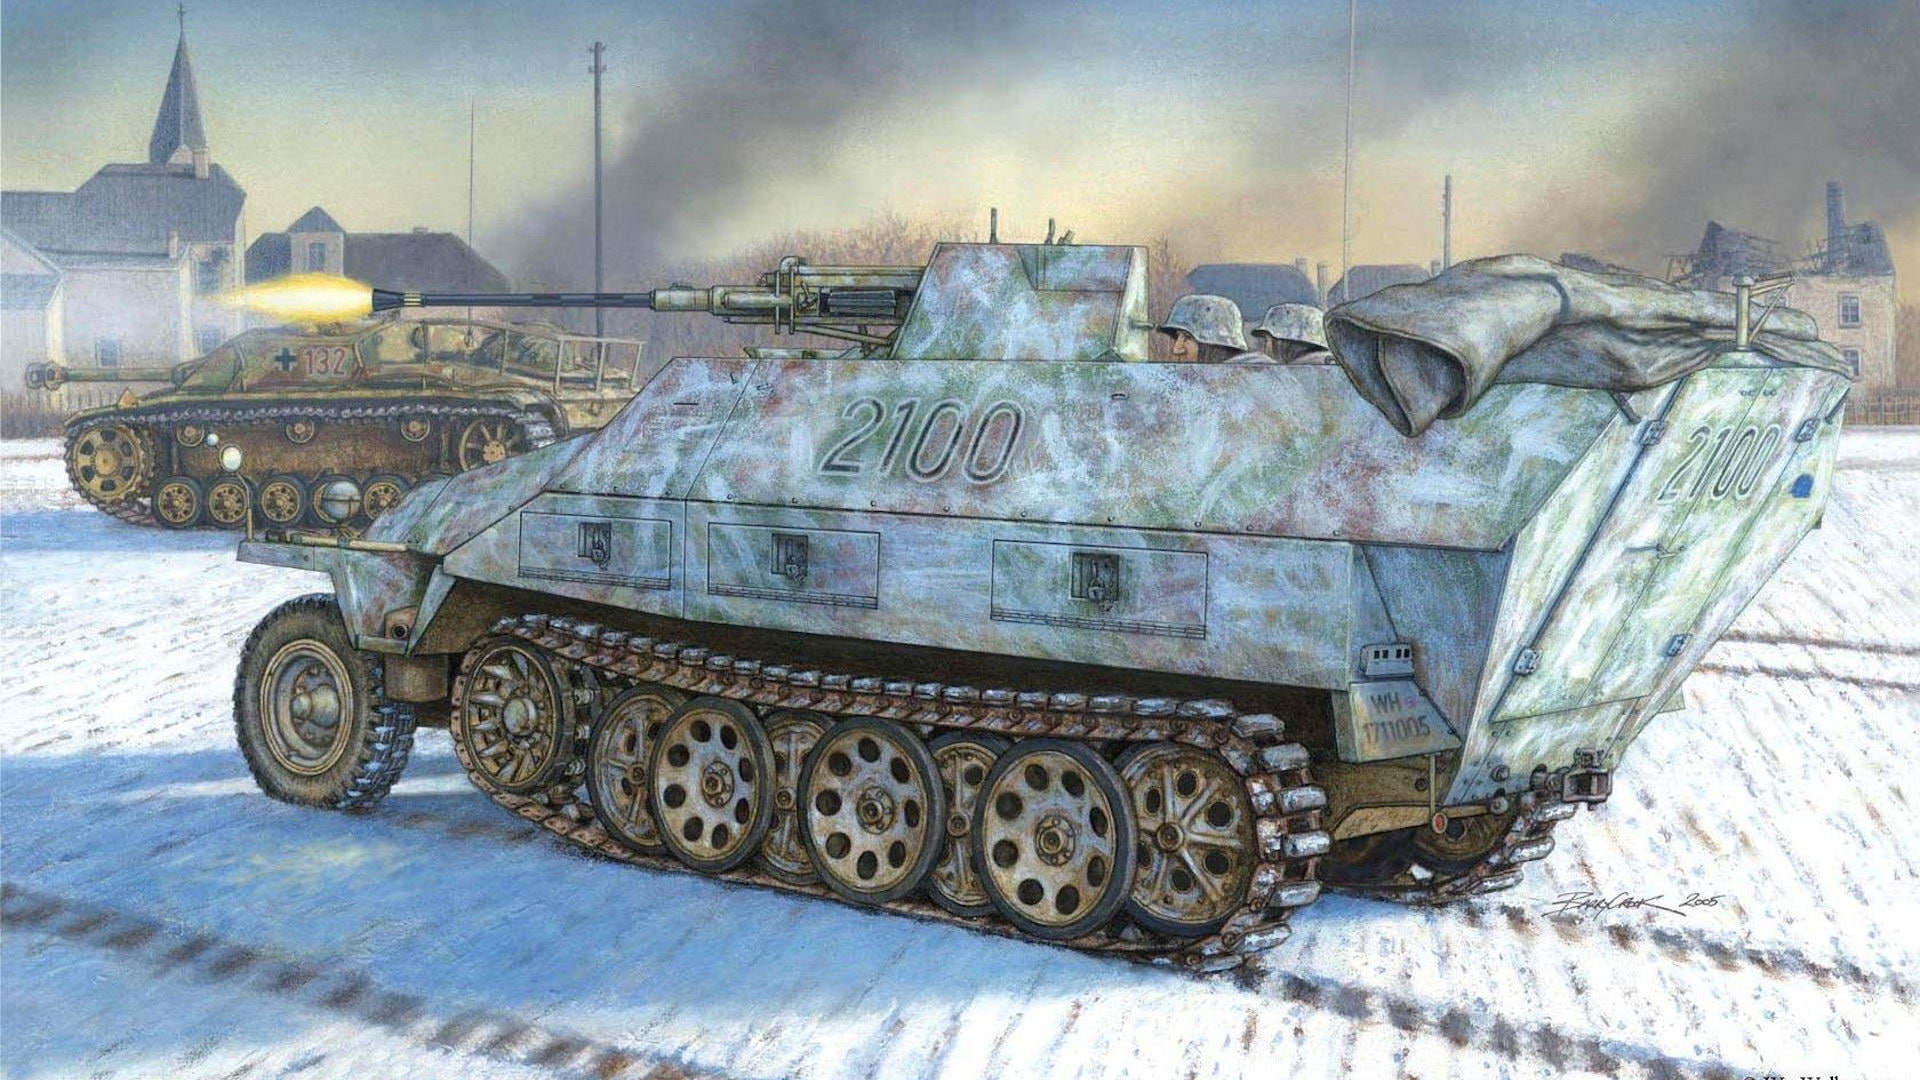 gray and green camouflage battle tank illustration, winter, war